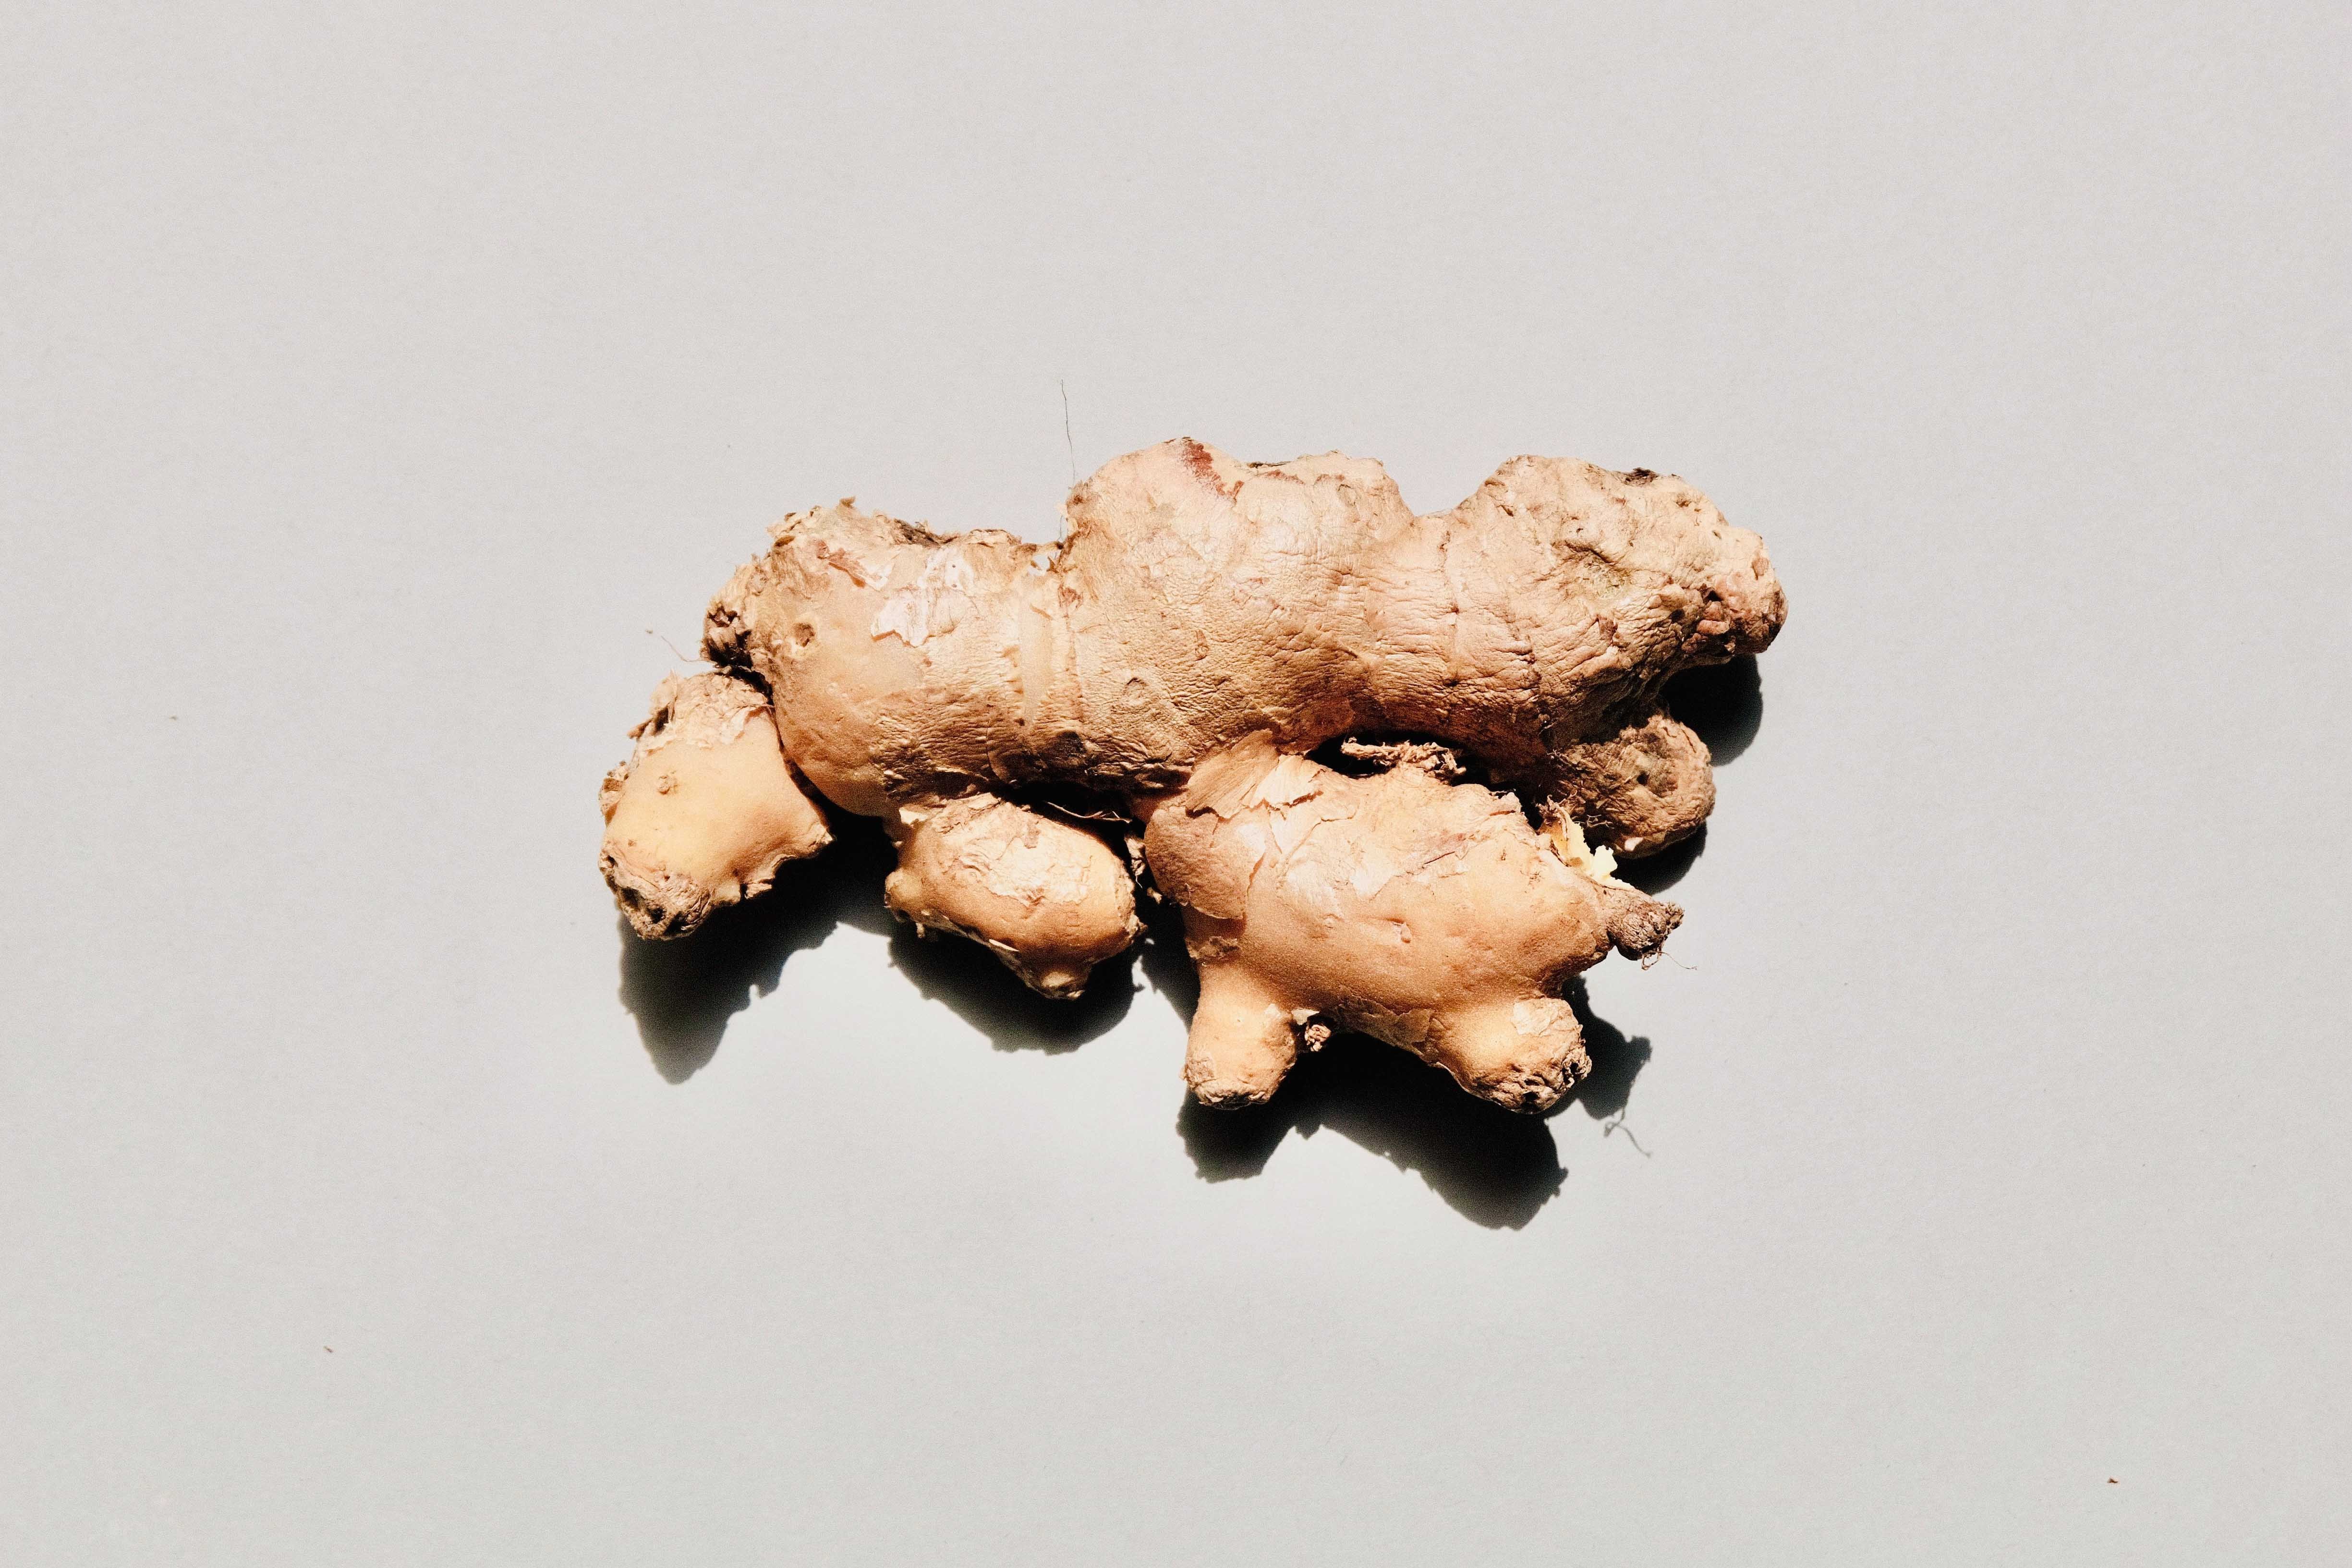 ginger root against grey white background